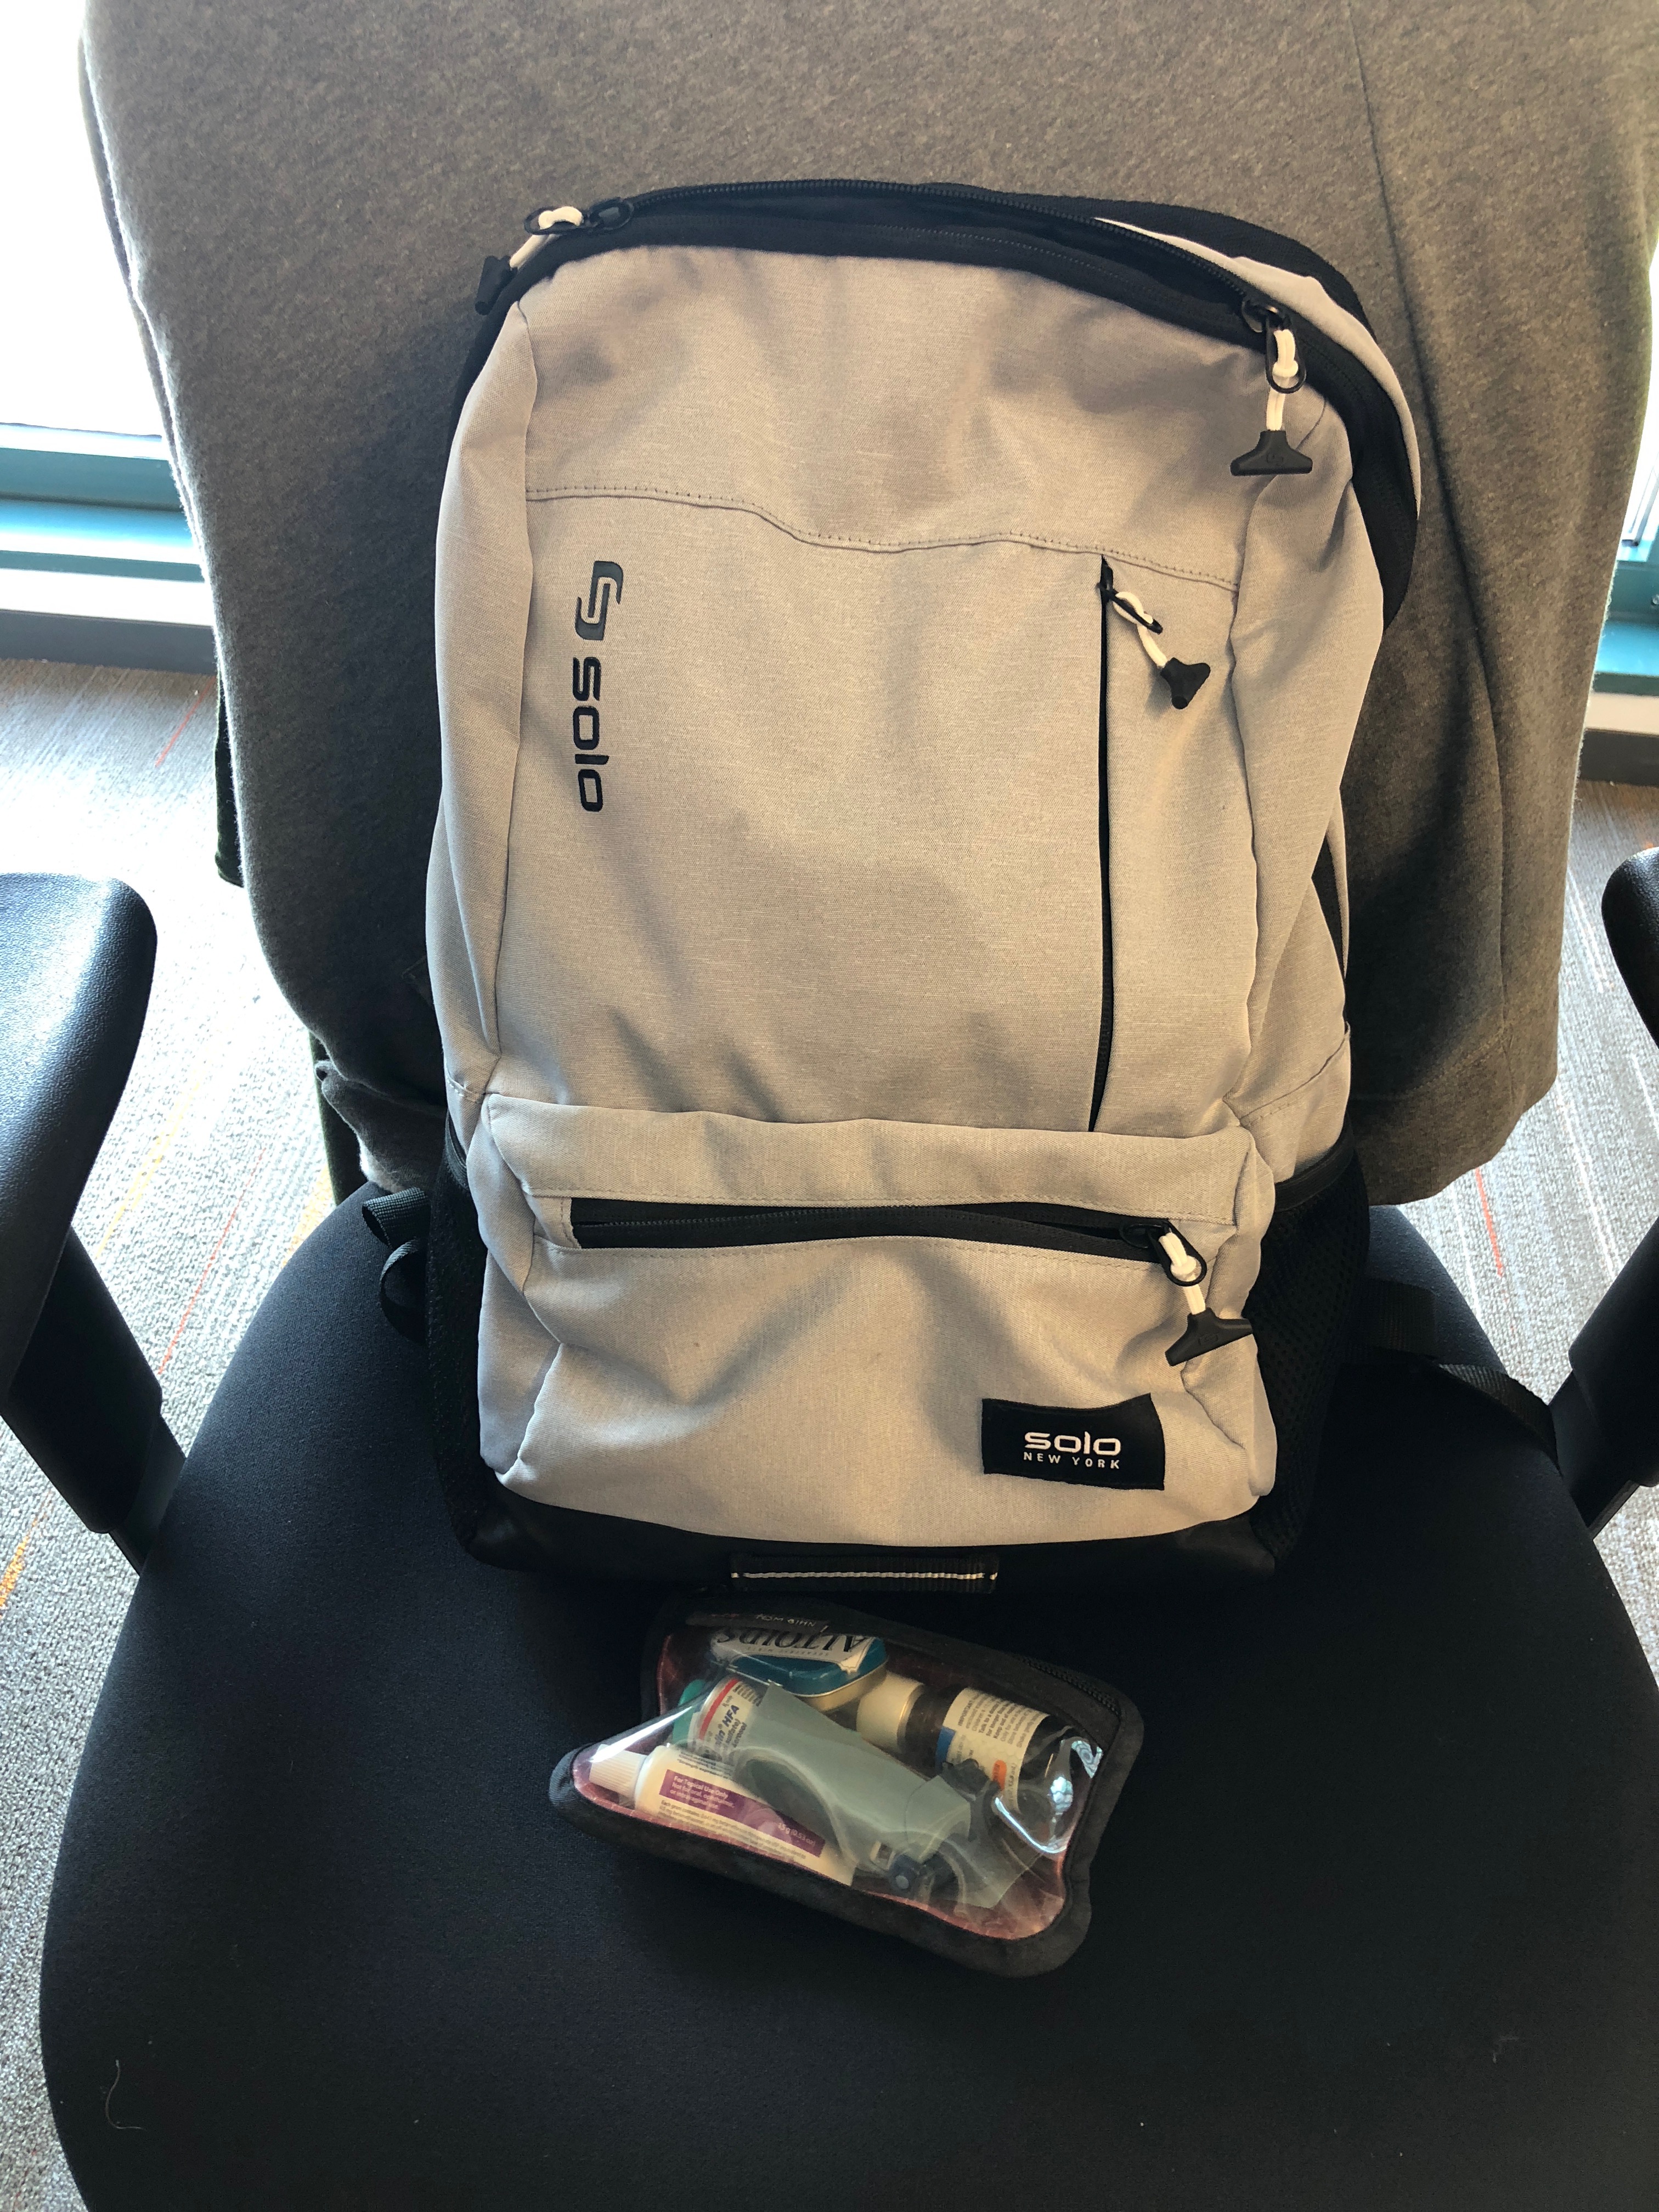 Solo New York Draft backpack review – The Gadgeteer